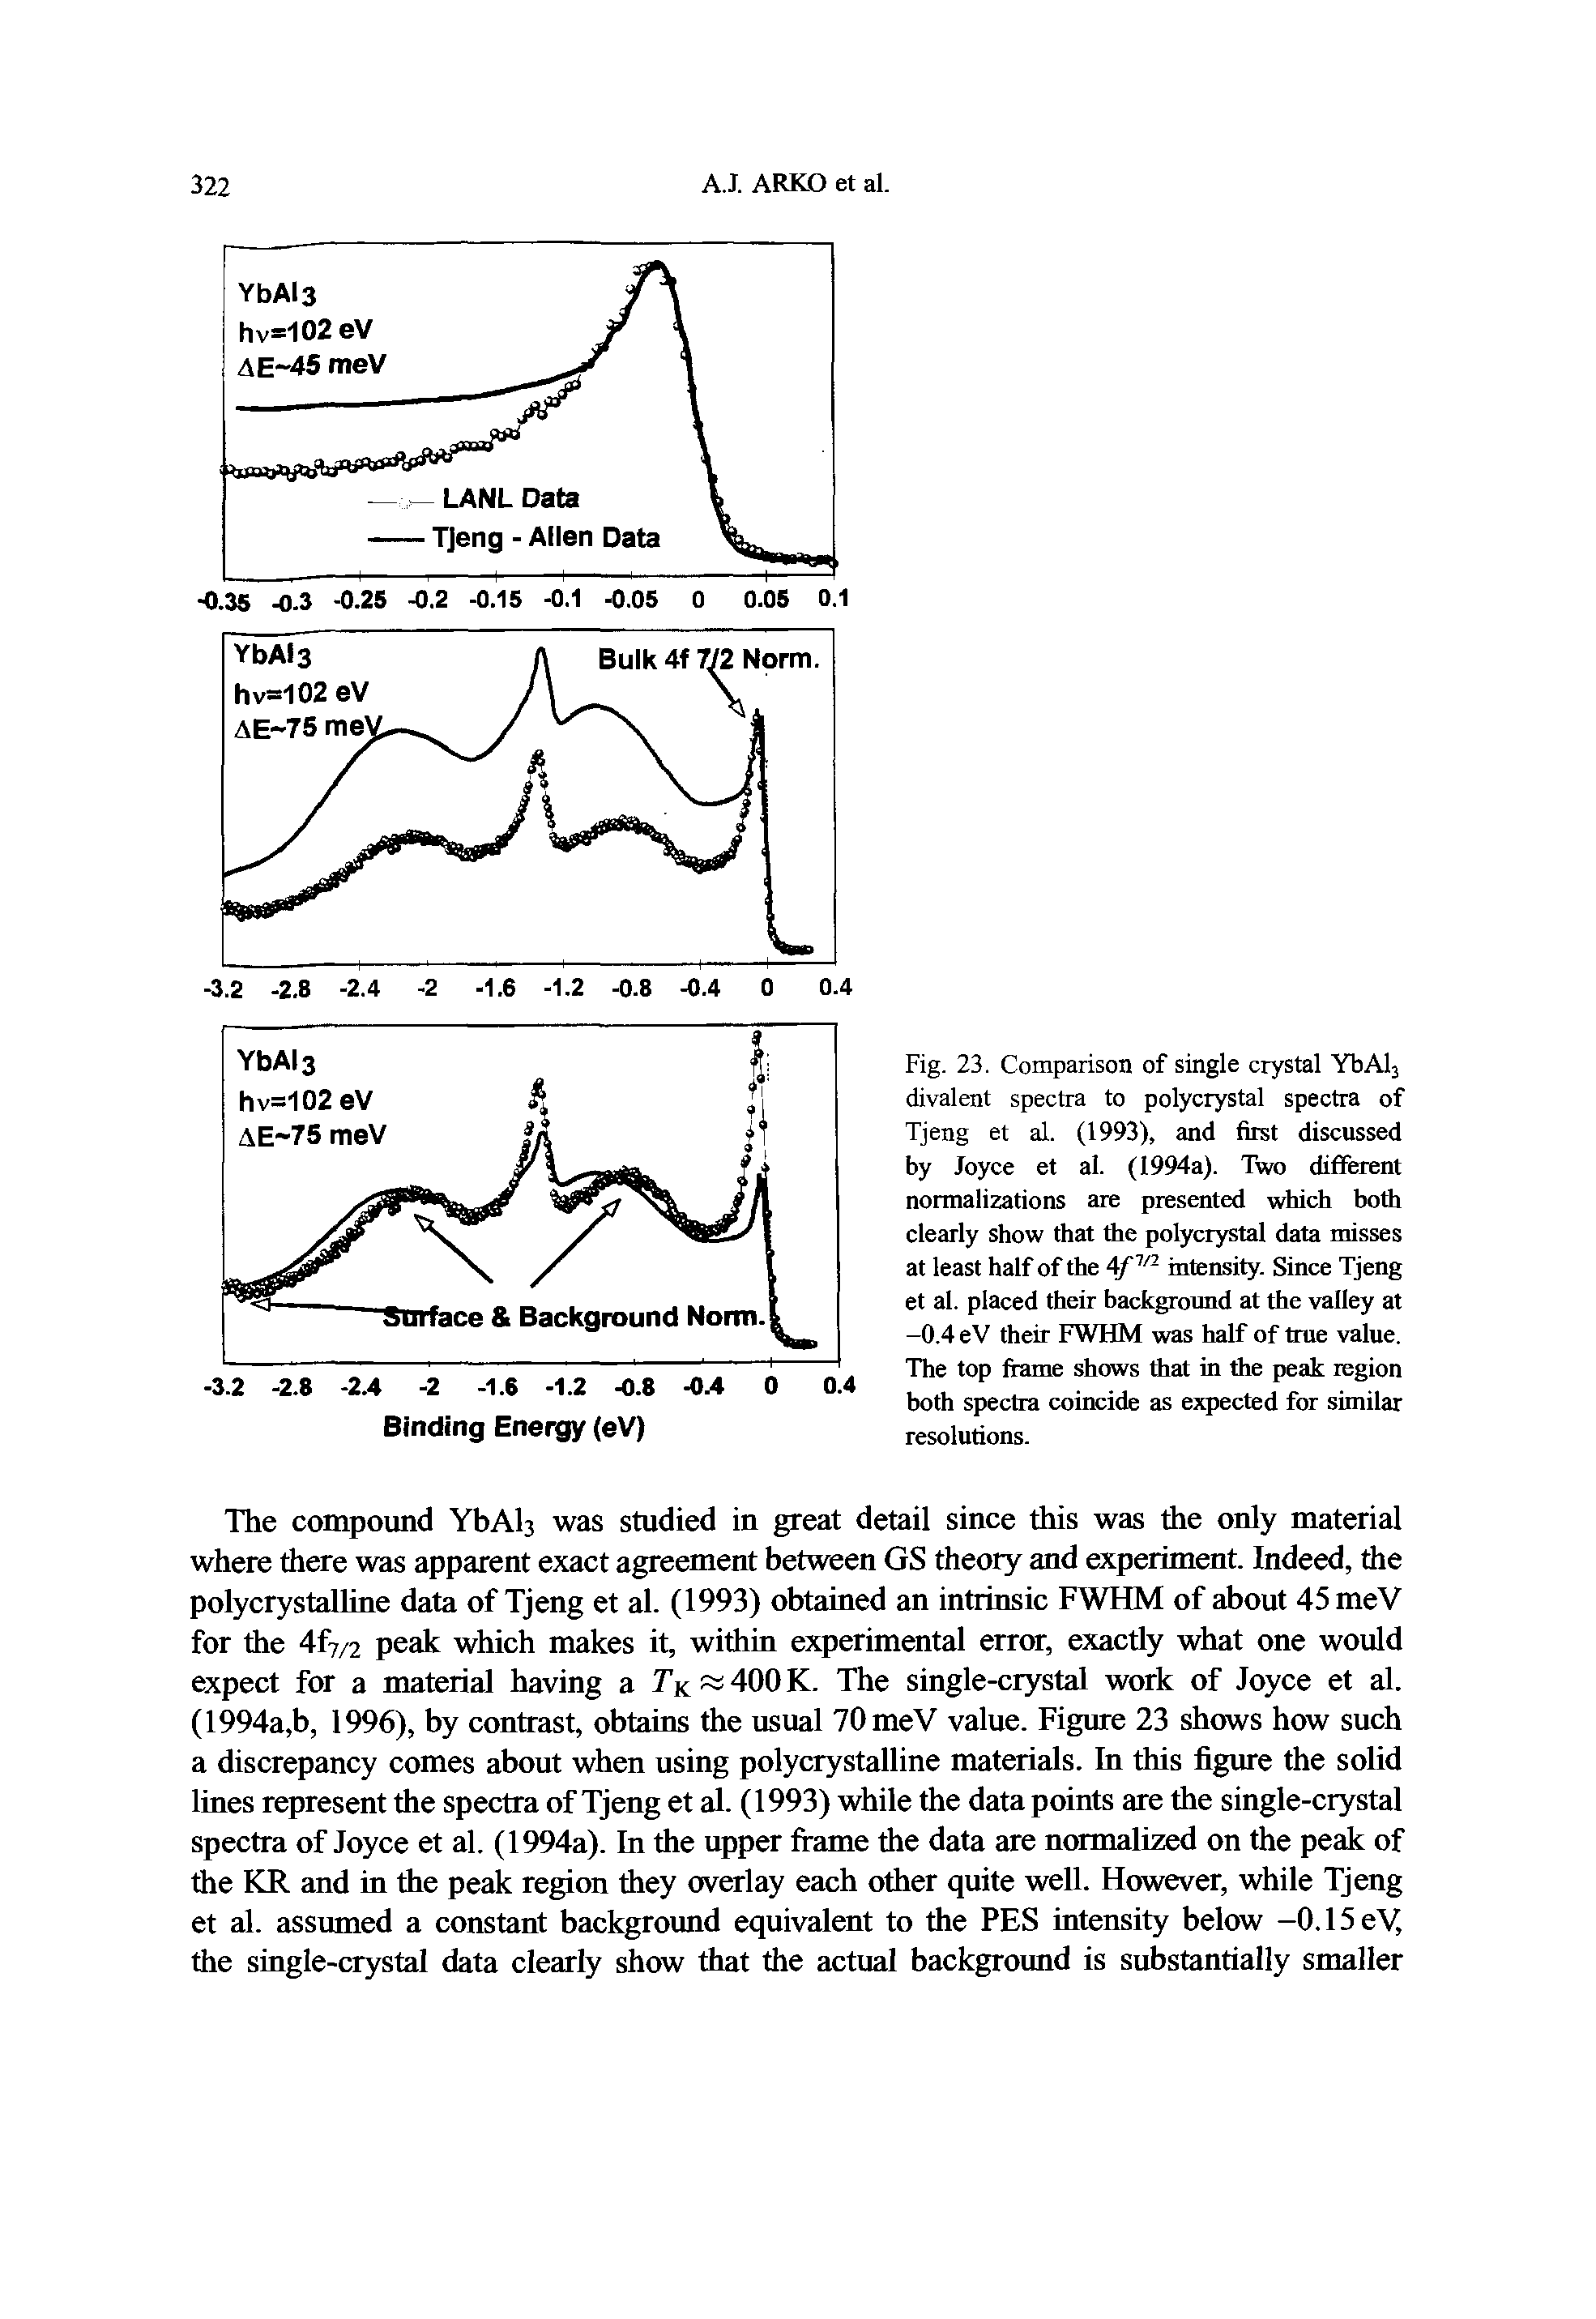 Fig. 23. Comparison of single crystal YbAl3 divalent spectra to polycrystal spectra of Tjeng et al. (1993), and first discussed by Joyce et al. (1994a). Two dififerent normalizations are presented which hoth clearly show that the polycrystal data misses at least half of the intensity. Since Tjeng...